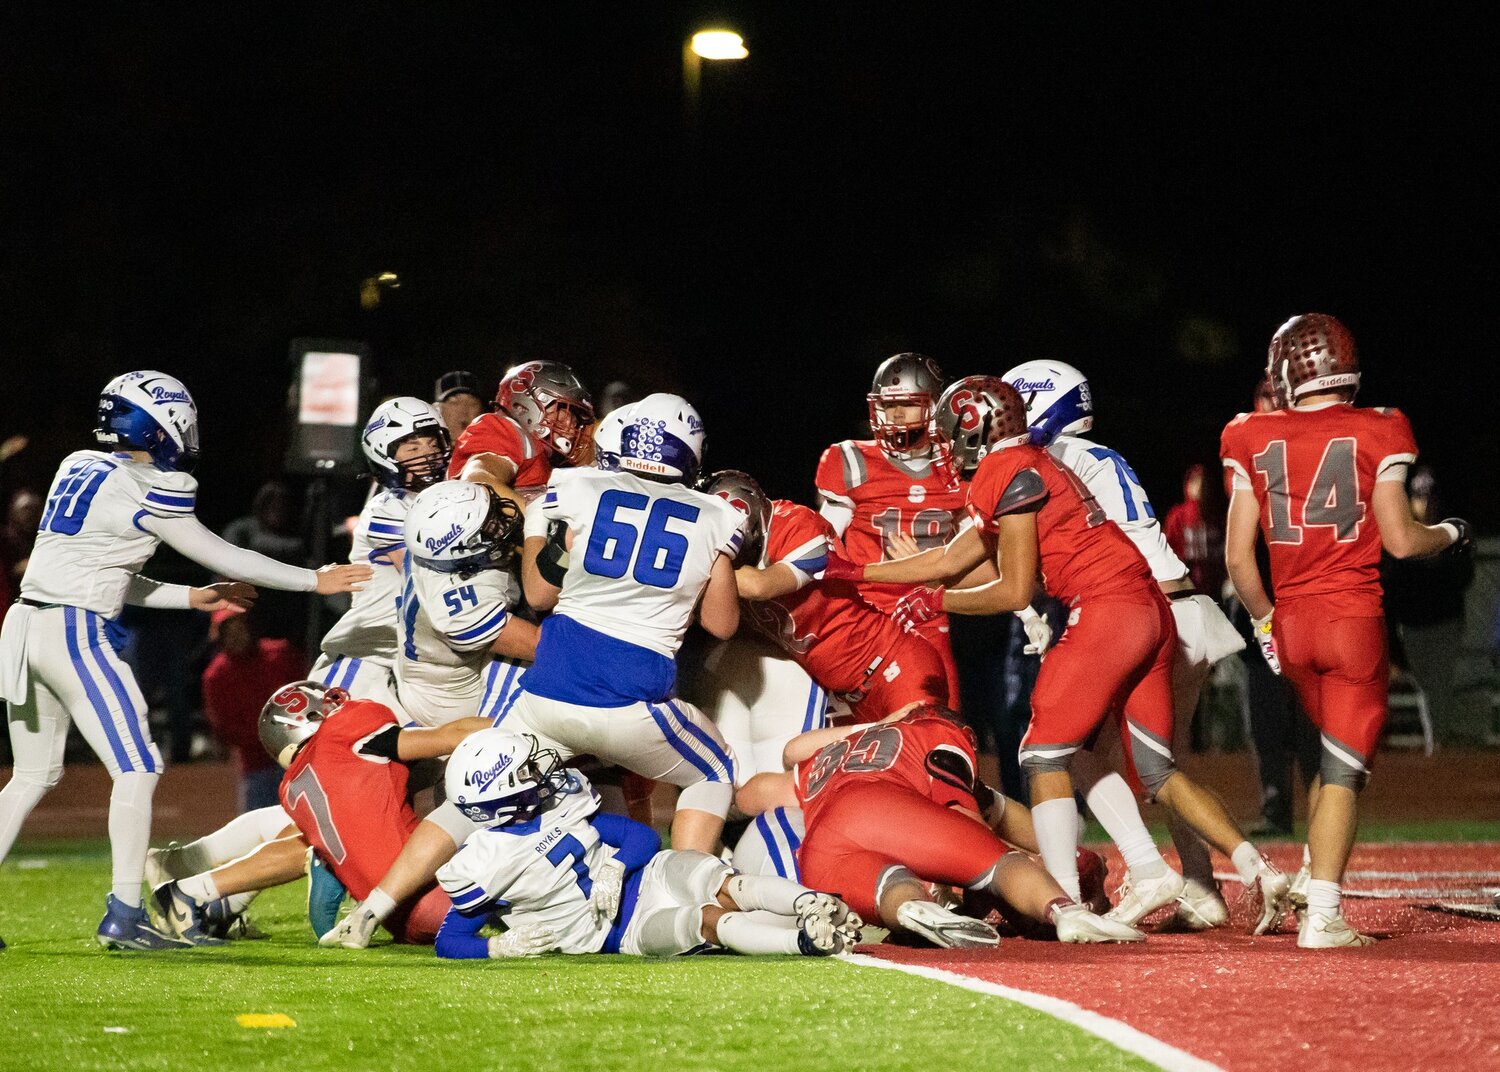 Southmont football's defense makes a goal line stand vs Eastern Hancock in last week's Regional Championship win.